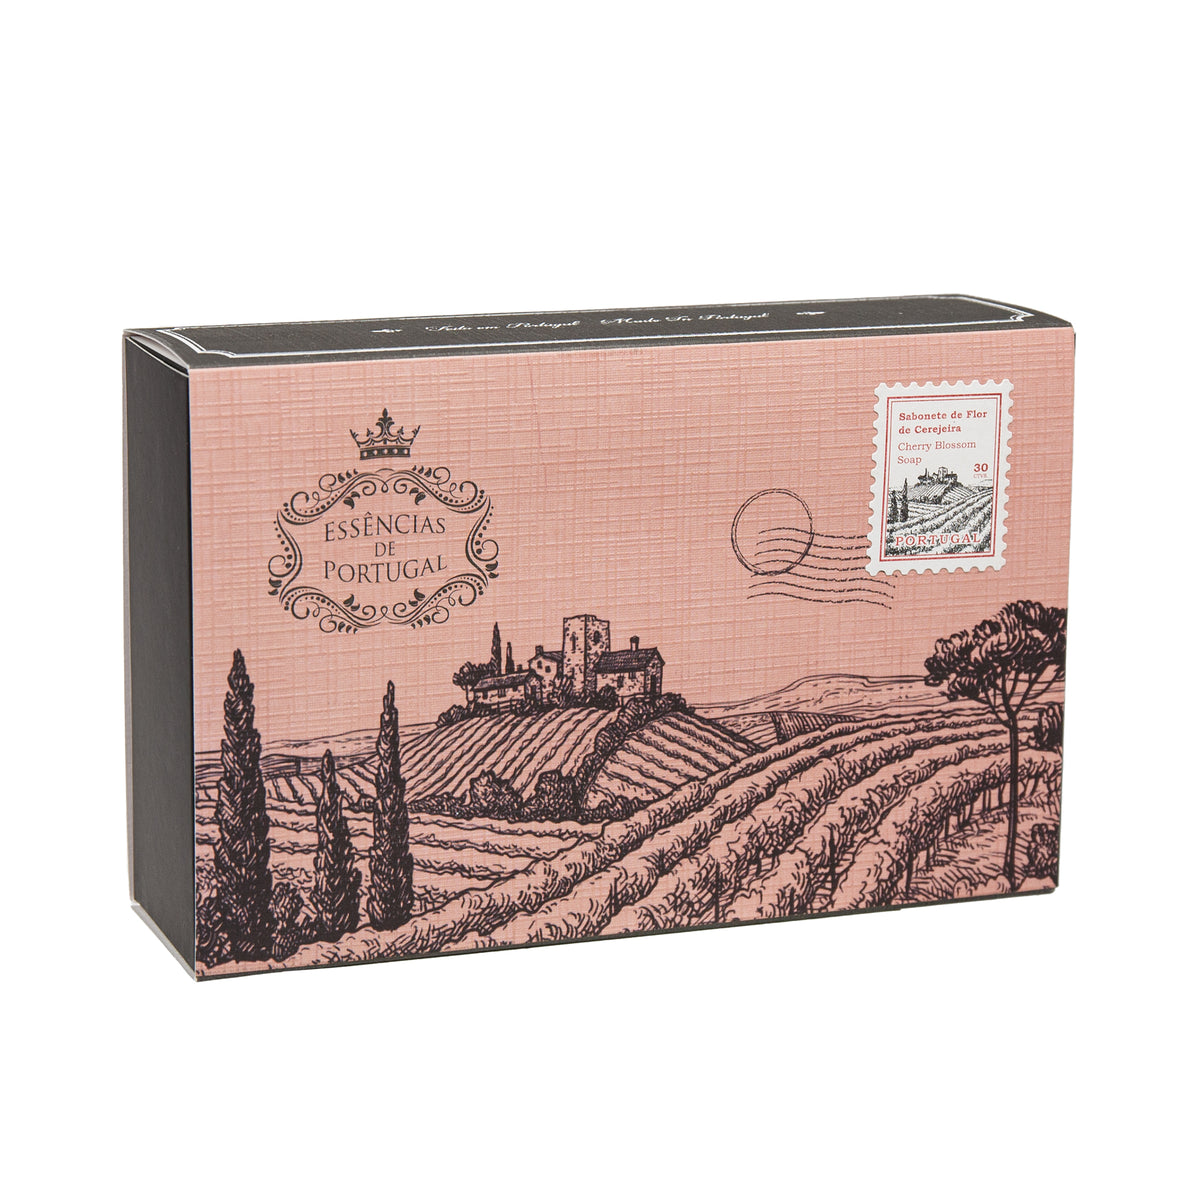 Primary Image of Postcard Cherry Blossom Soap